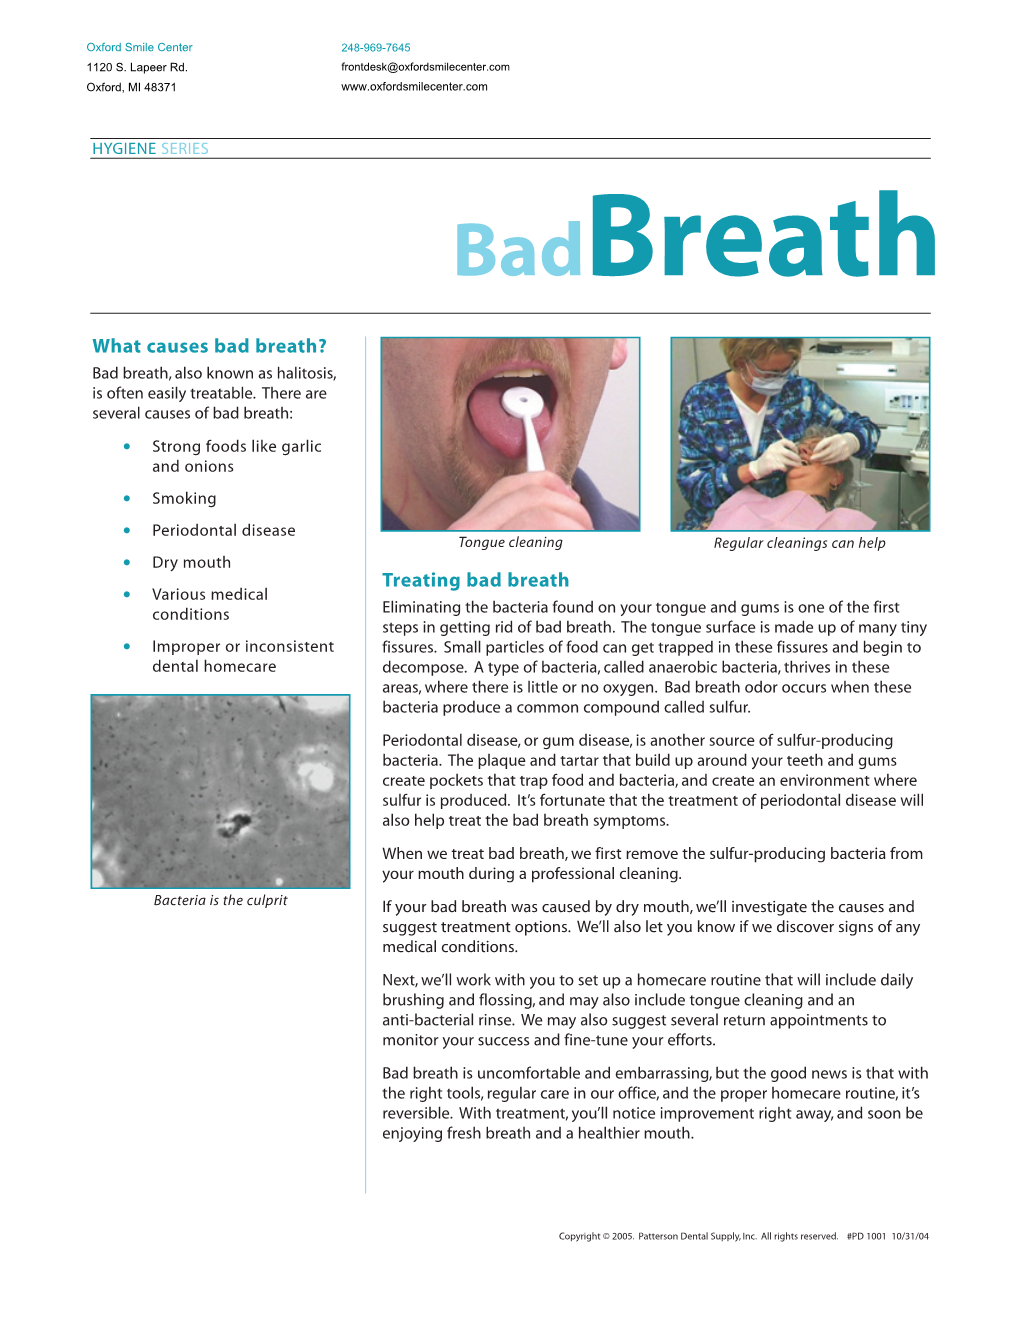 Bad Breath? Bad Breath, Also Known As Halitosis, Is Often Easily Treatable